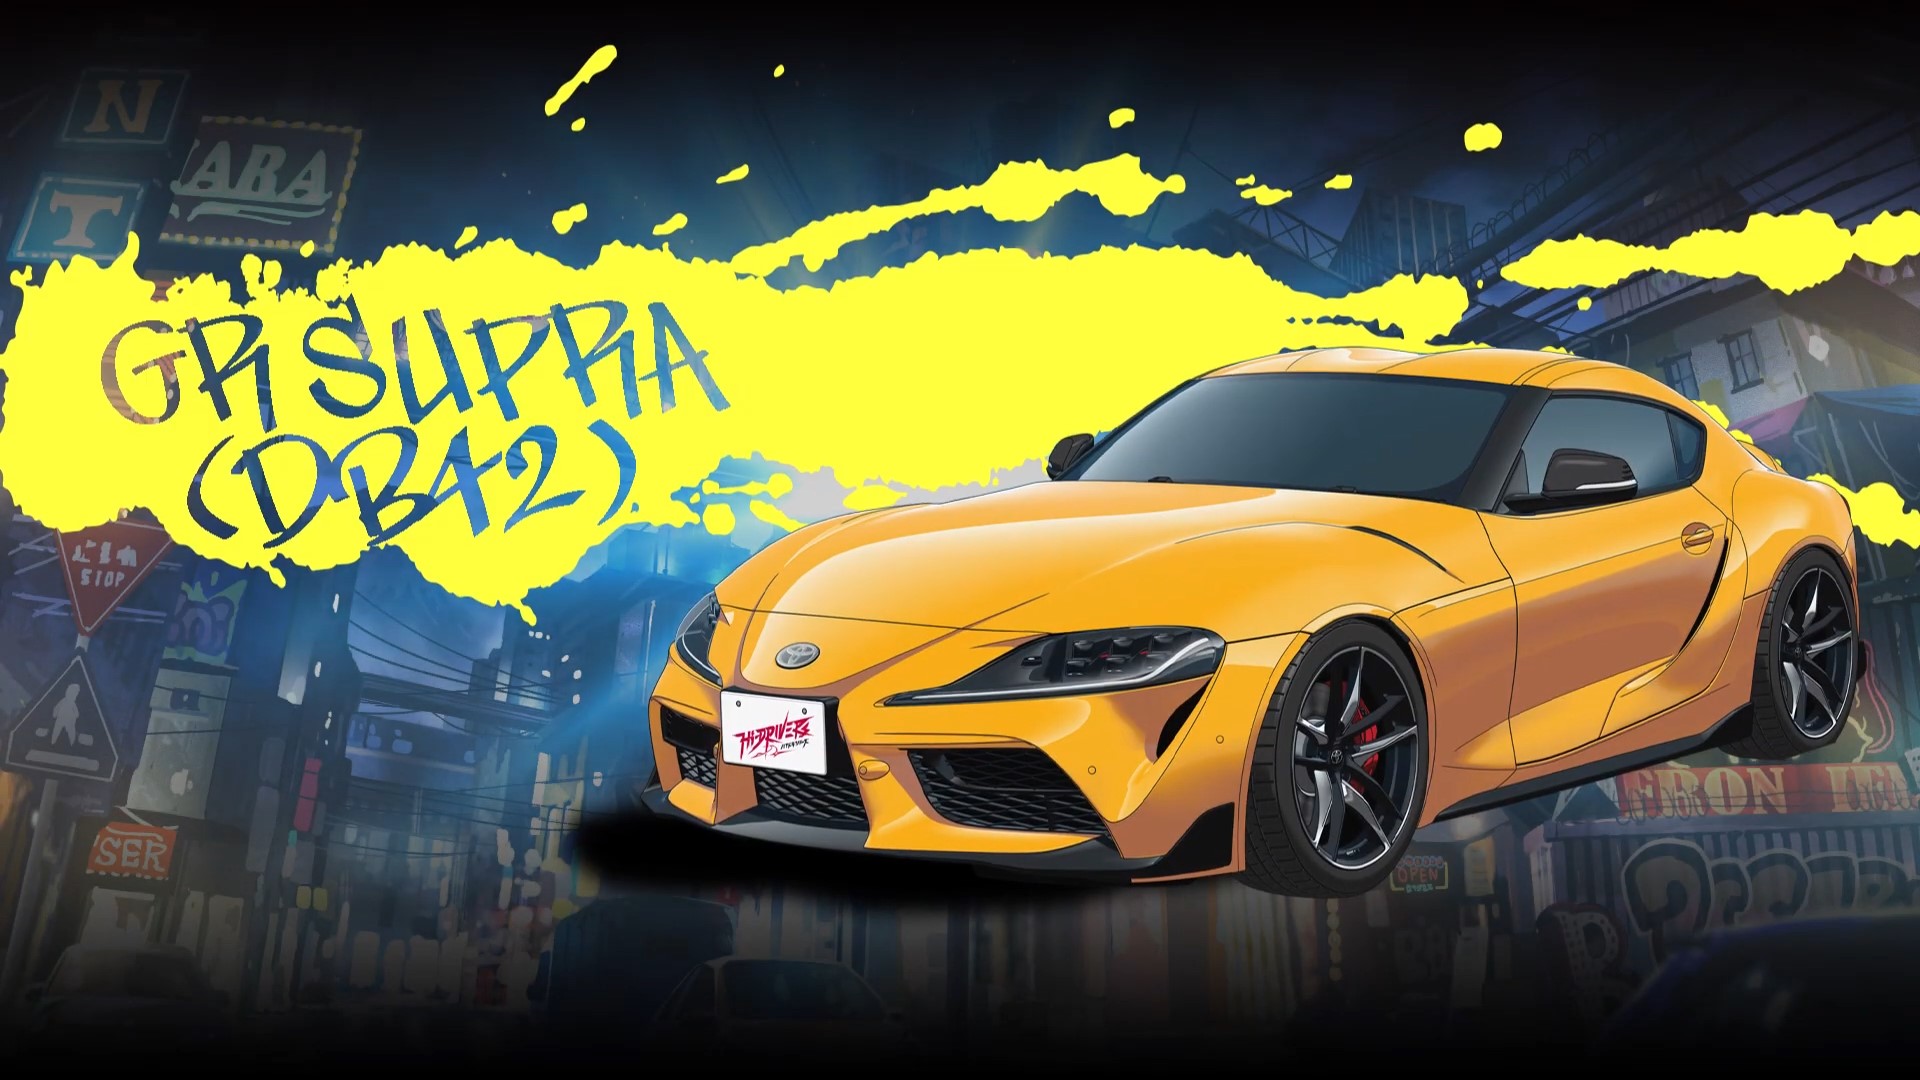 Catsuka  on Twitter Note  HiDRIVERS is a project featuring  fictional characters competing in car races Produced by Sunrise amp  Bandai Namco with Honda Subaru Toyota amp Nissan  httpstcohMdnDbF5D4 httpstco288ucPvUa5 